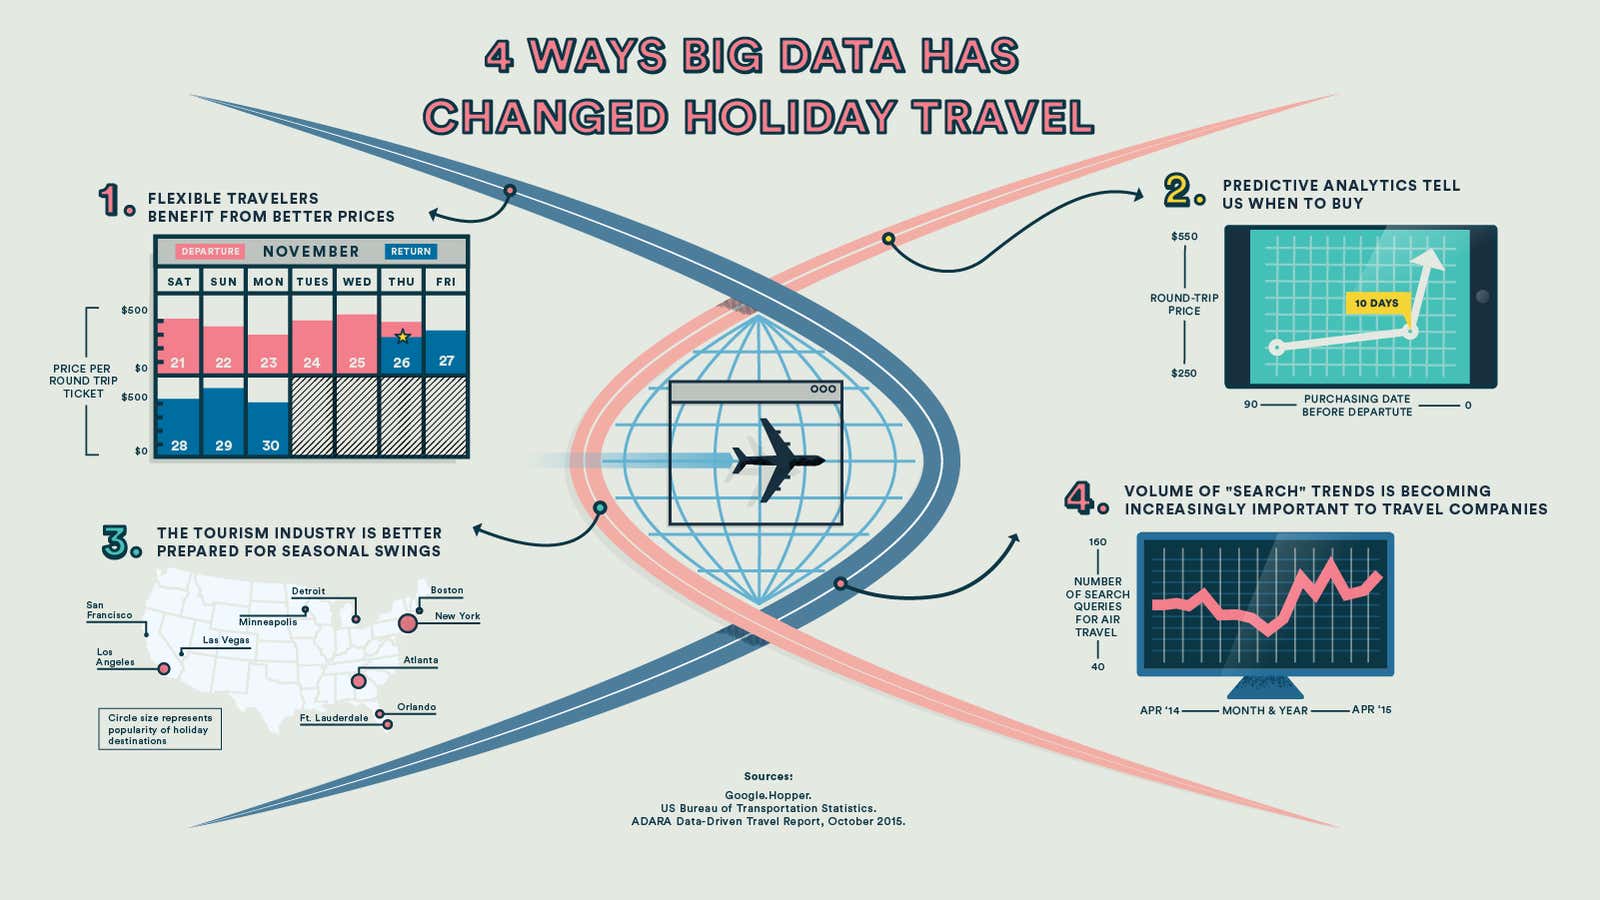 Your holiday travel woes can be relieved by big data